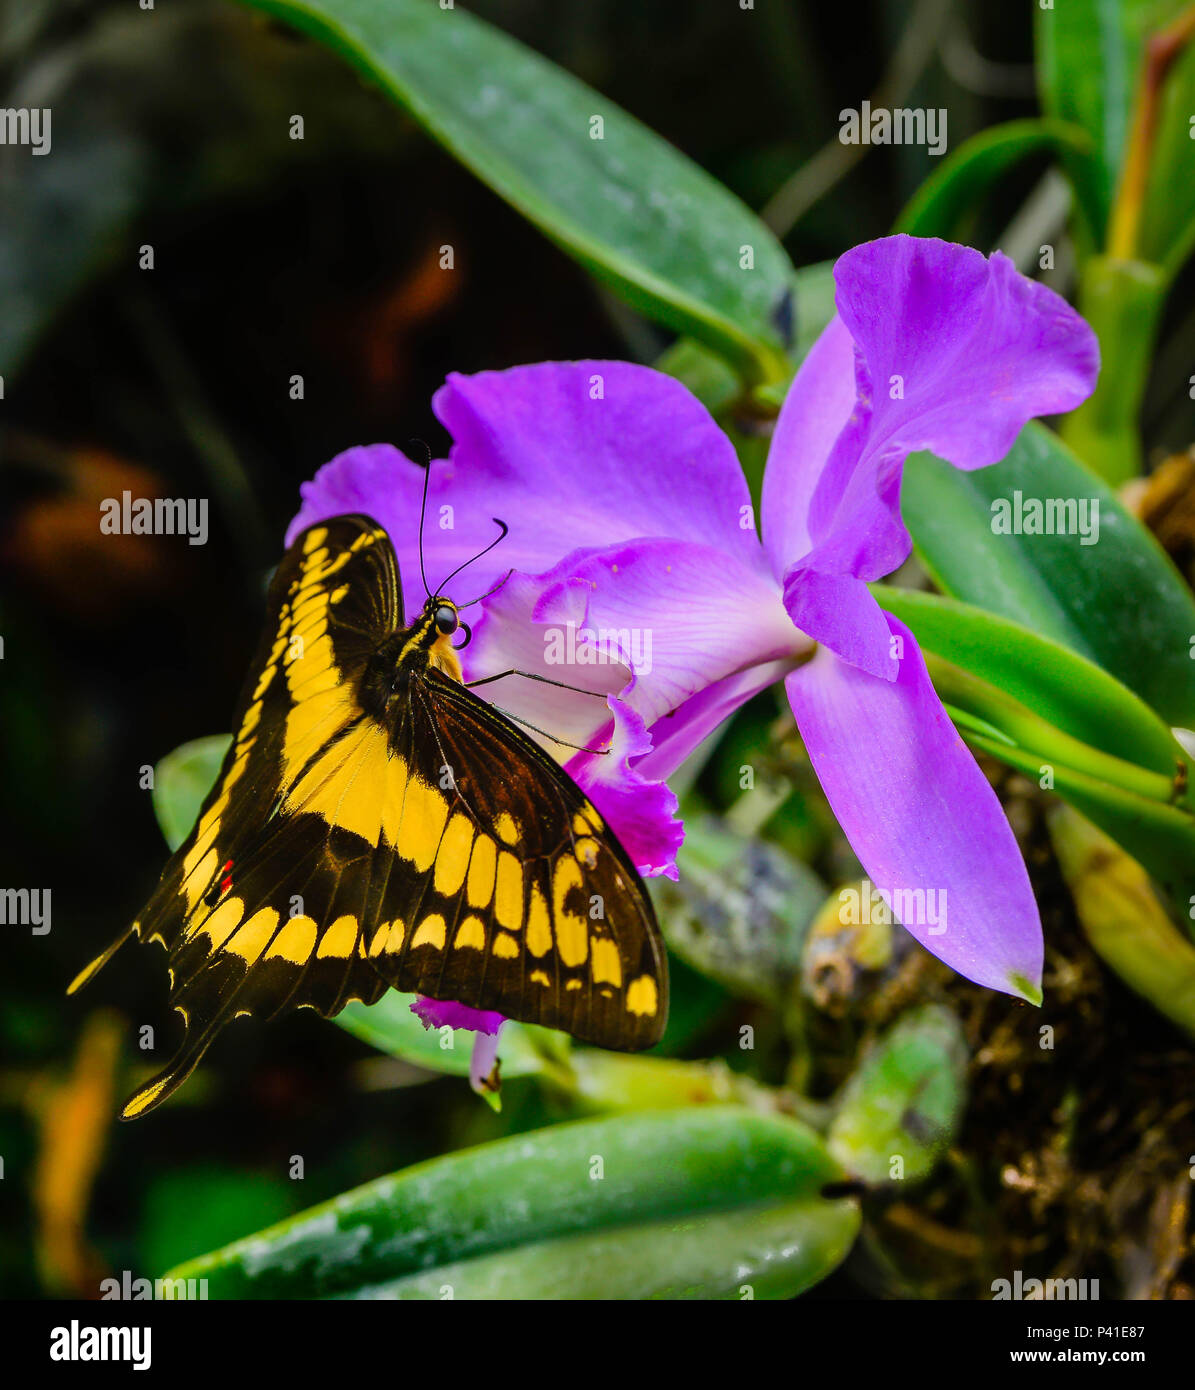 A brilliant Black and Yellow Texas Swallowtail butterfly visits an exotic  purple orchid flower with wings spread Stock Photo